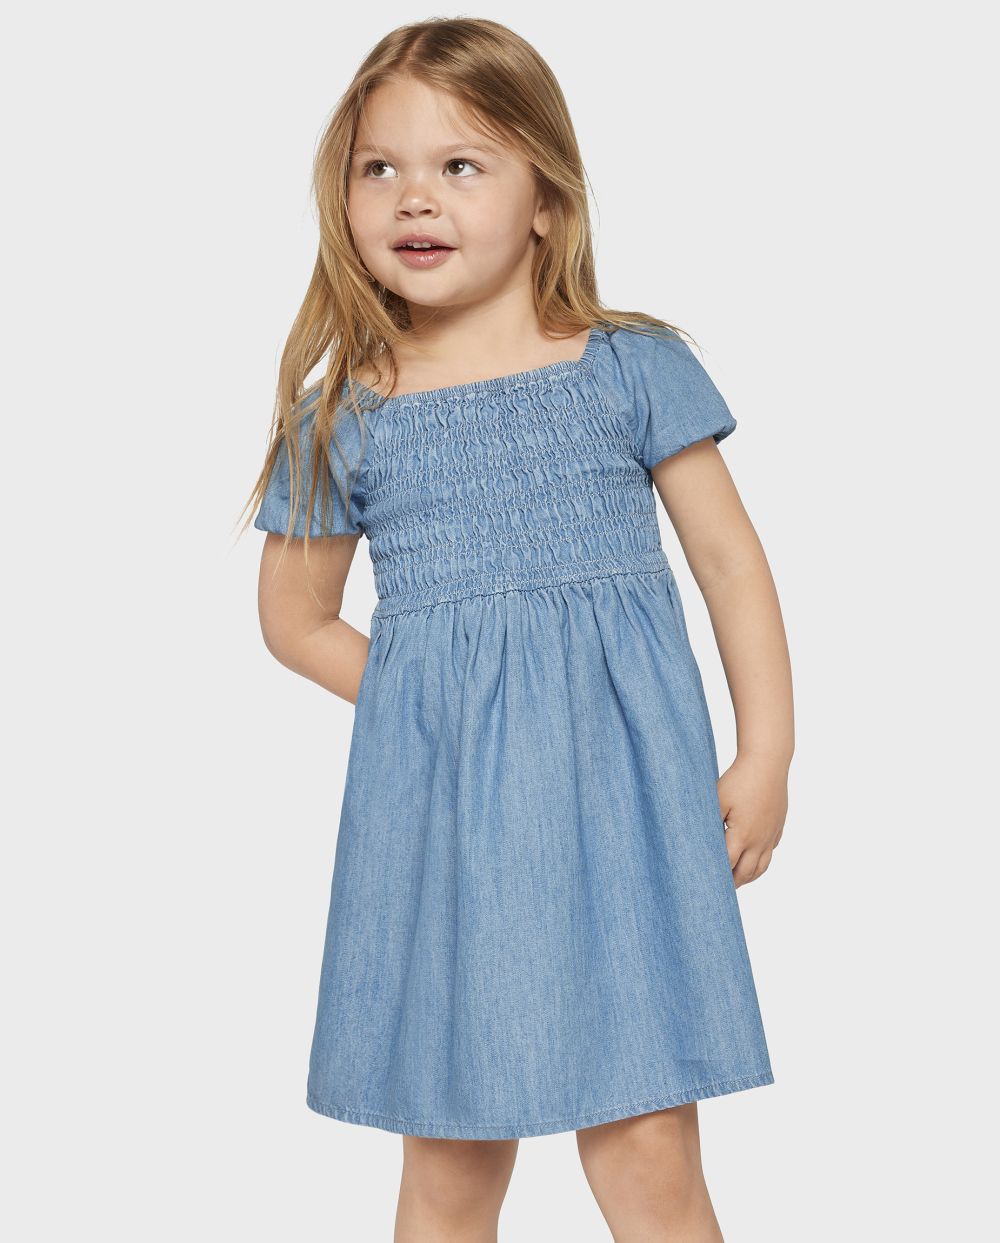 Toddler Above the Knee Smocked Square Neck Puff Sleeves Short Sleeves Sleeves Dress